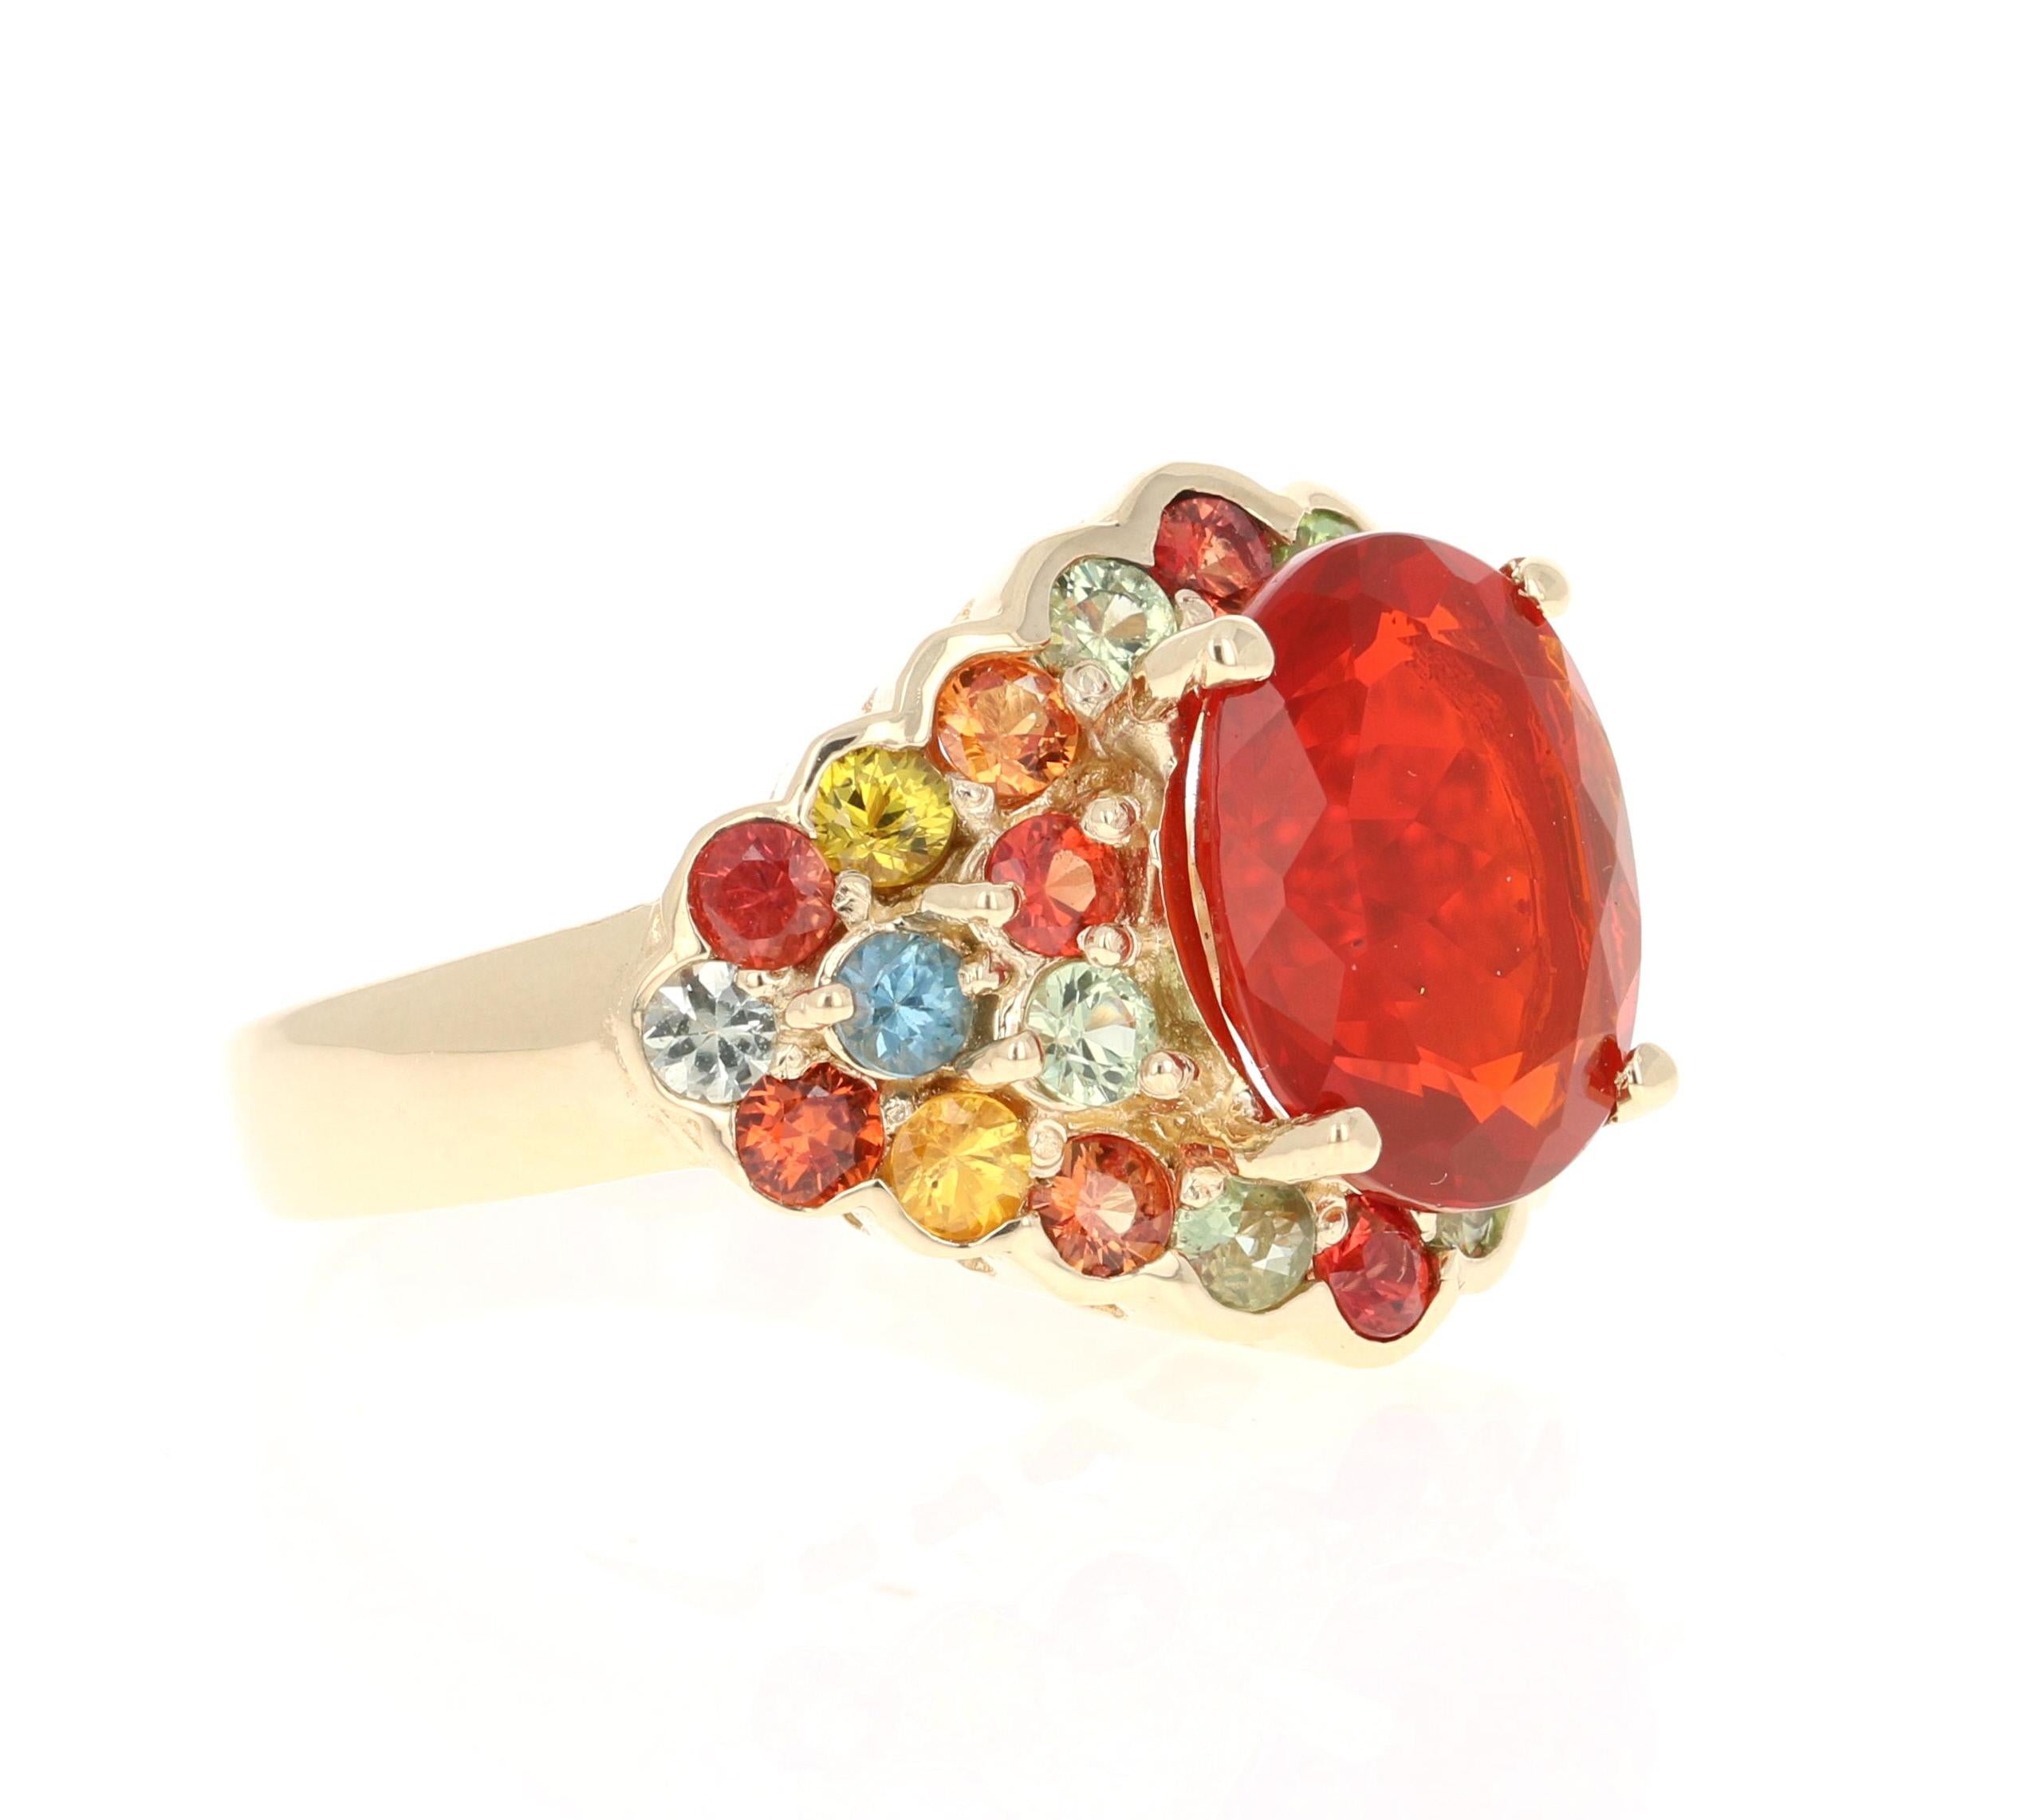 This ring has a 3.17 Carat Oval Cut Fire Opal as its center stone and is elegantly surrounded by 26 Round Cut Multi-Colored Sapphires that weigh 2.65 Carats. The measurements of the Fire Opal are 11 mm x 13 mm. 
The total carat weight of this ring